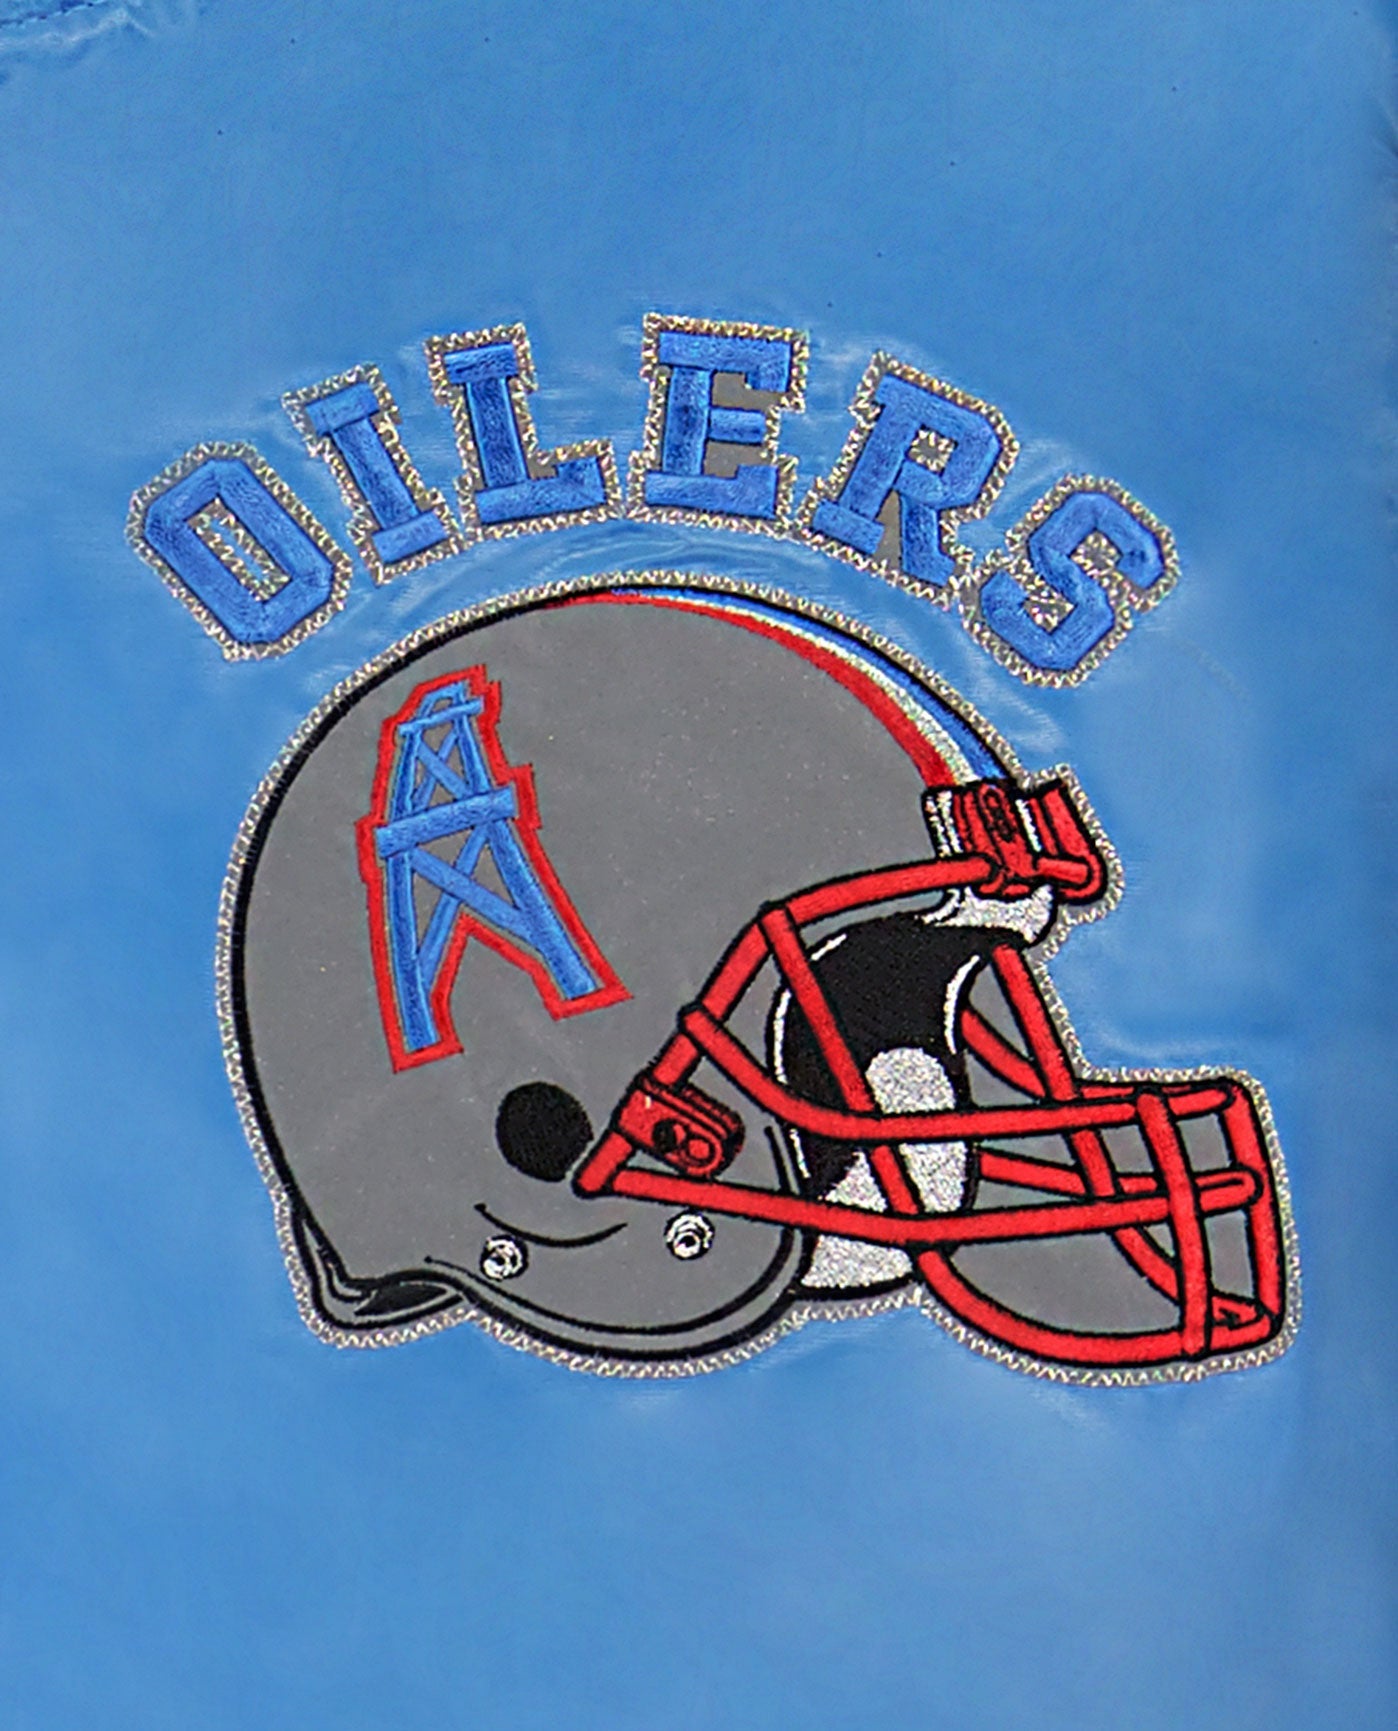 OILERS writing and helmet logo top left chest | Oilers Light Blue